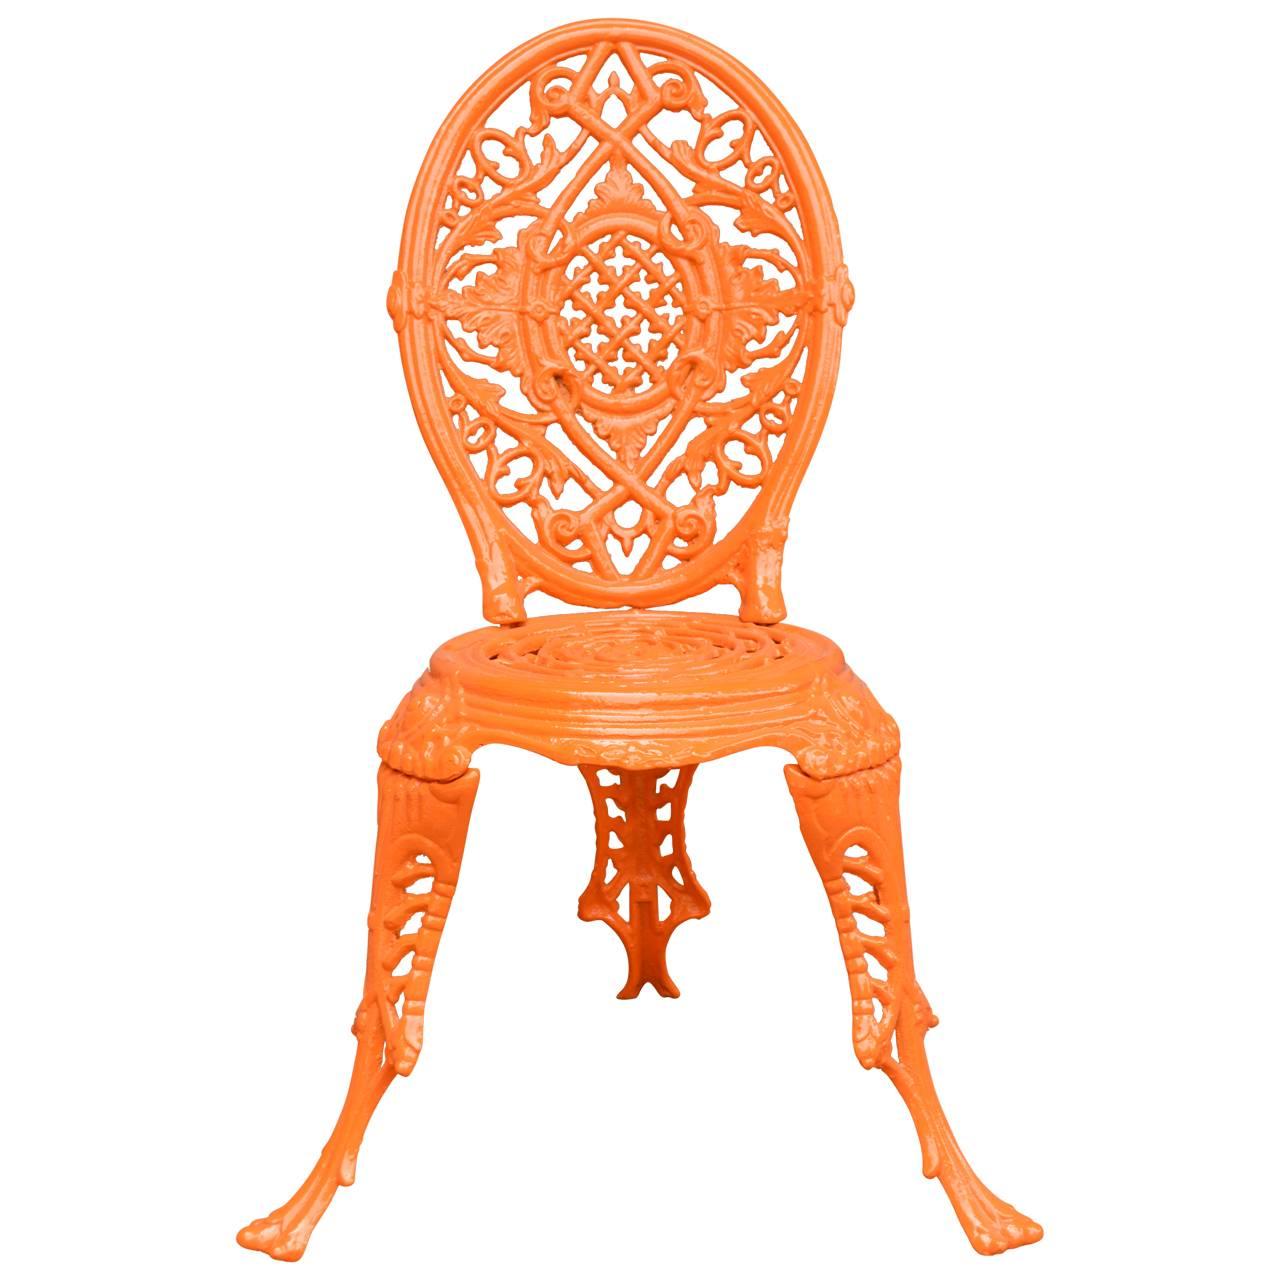 Neoclassical Early 20th Century Orange Cast Iron Garden Chair